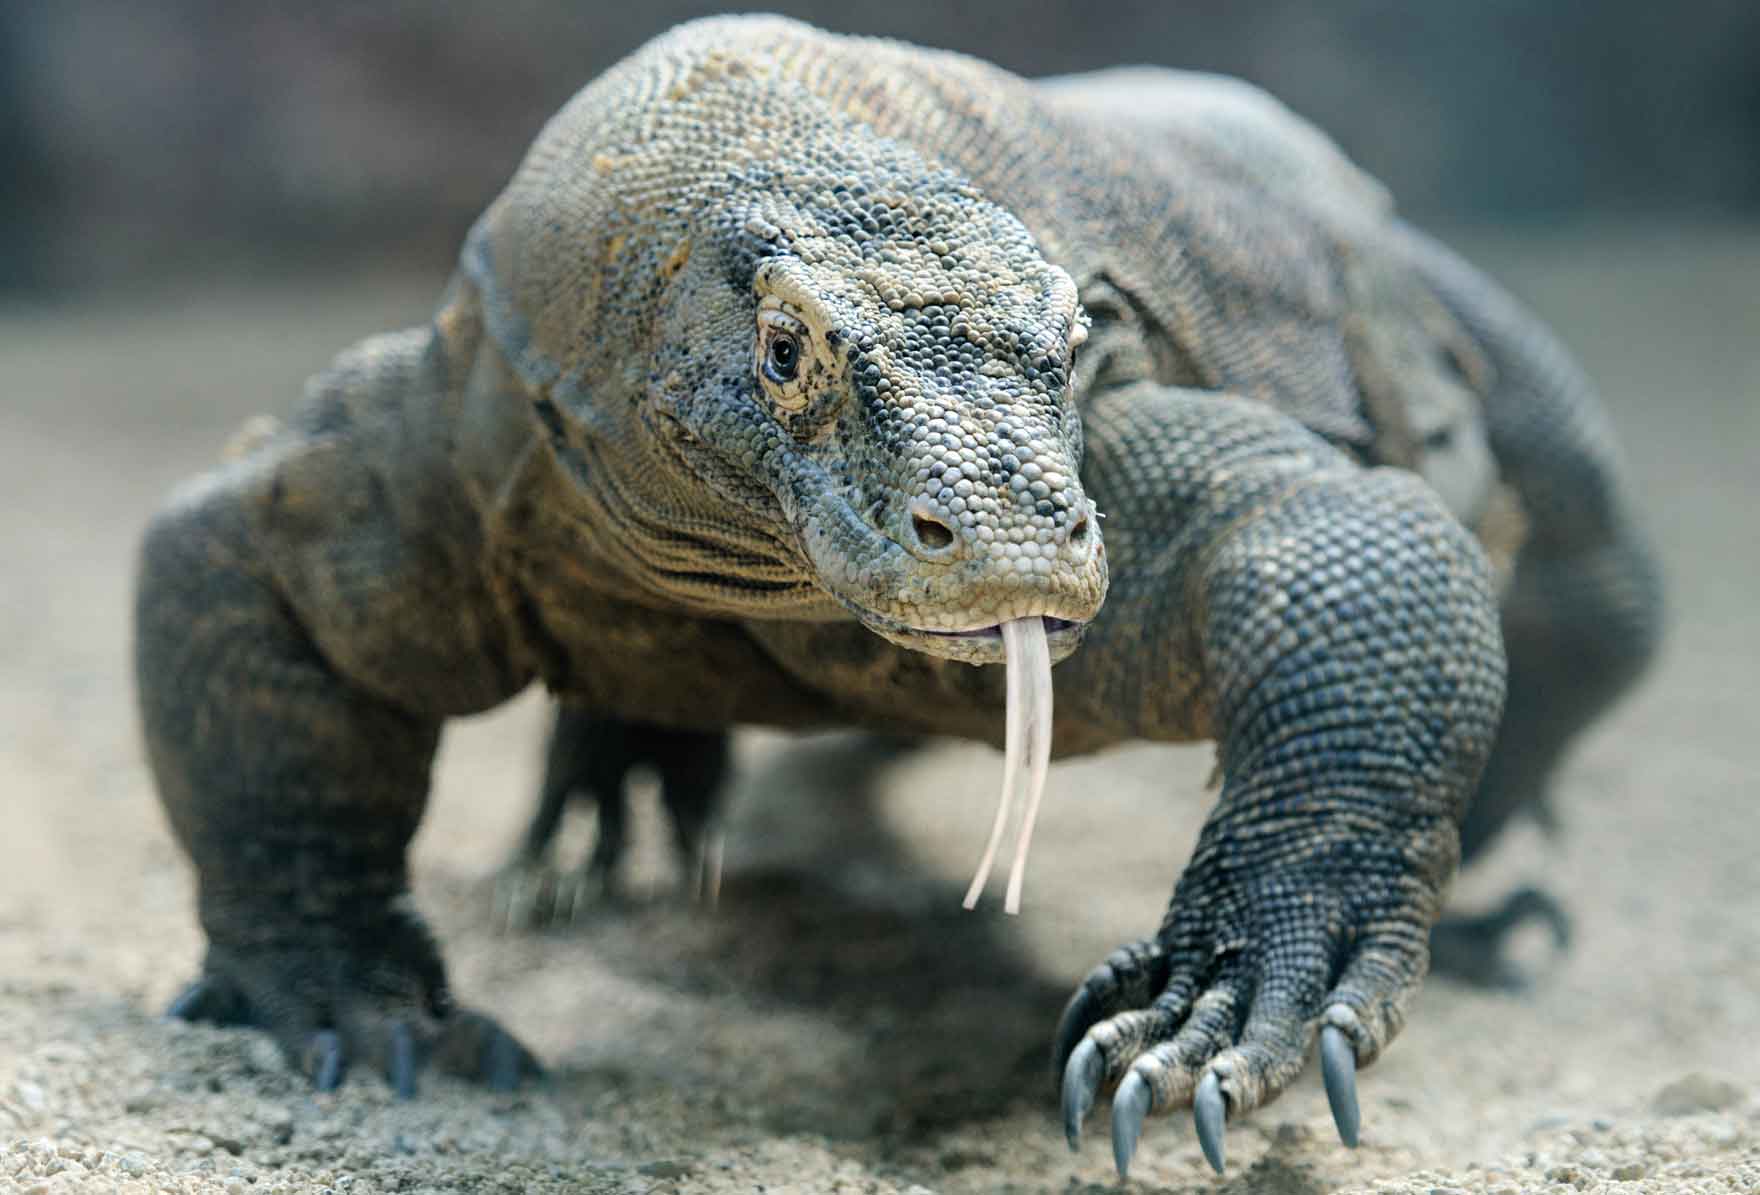 Komodo Dragon Blood Could Fight Antibiotic-Resistant Bacteria image